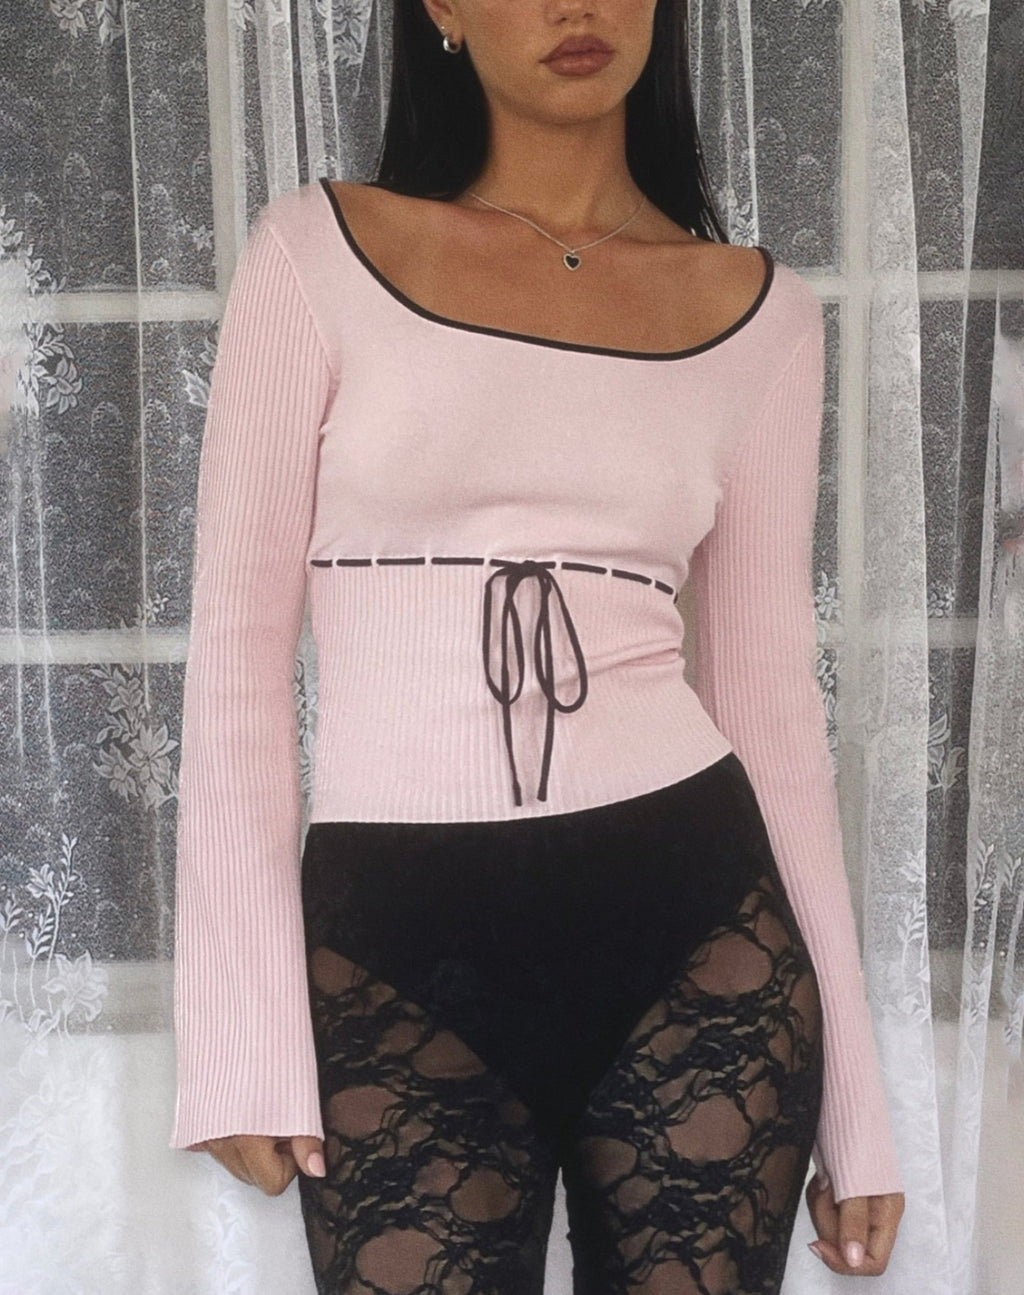 Juhye Knitted Long Sleeve Top in Blush Pink with Black Binding (Top à manches longues en tricot, rose chair et bordures noires)